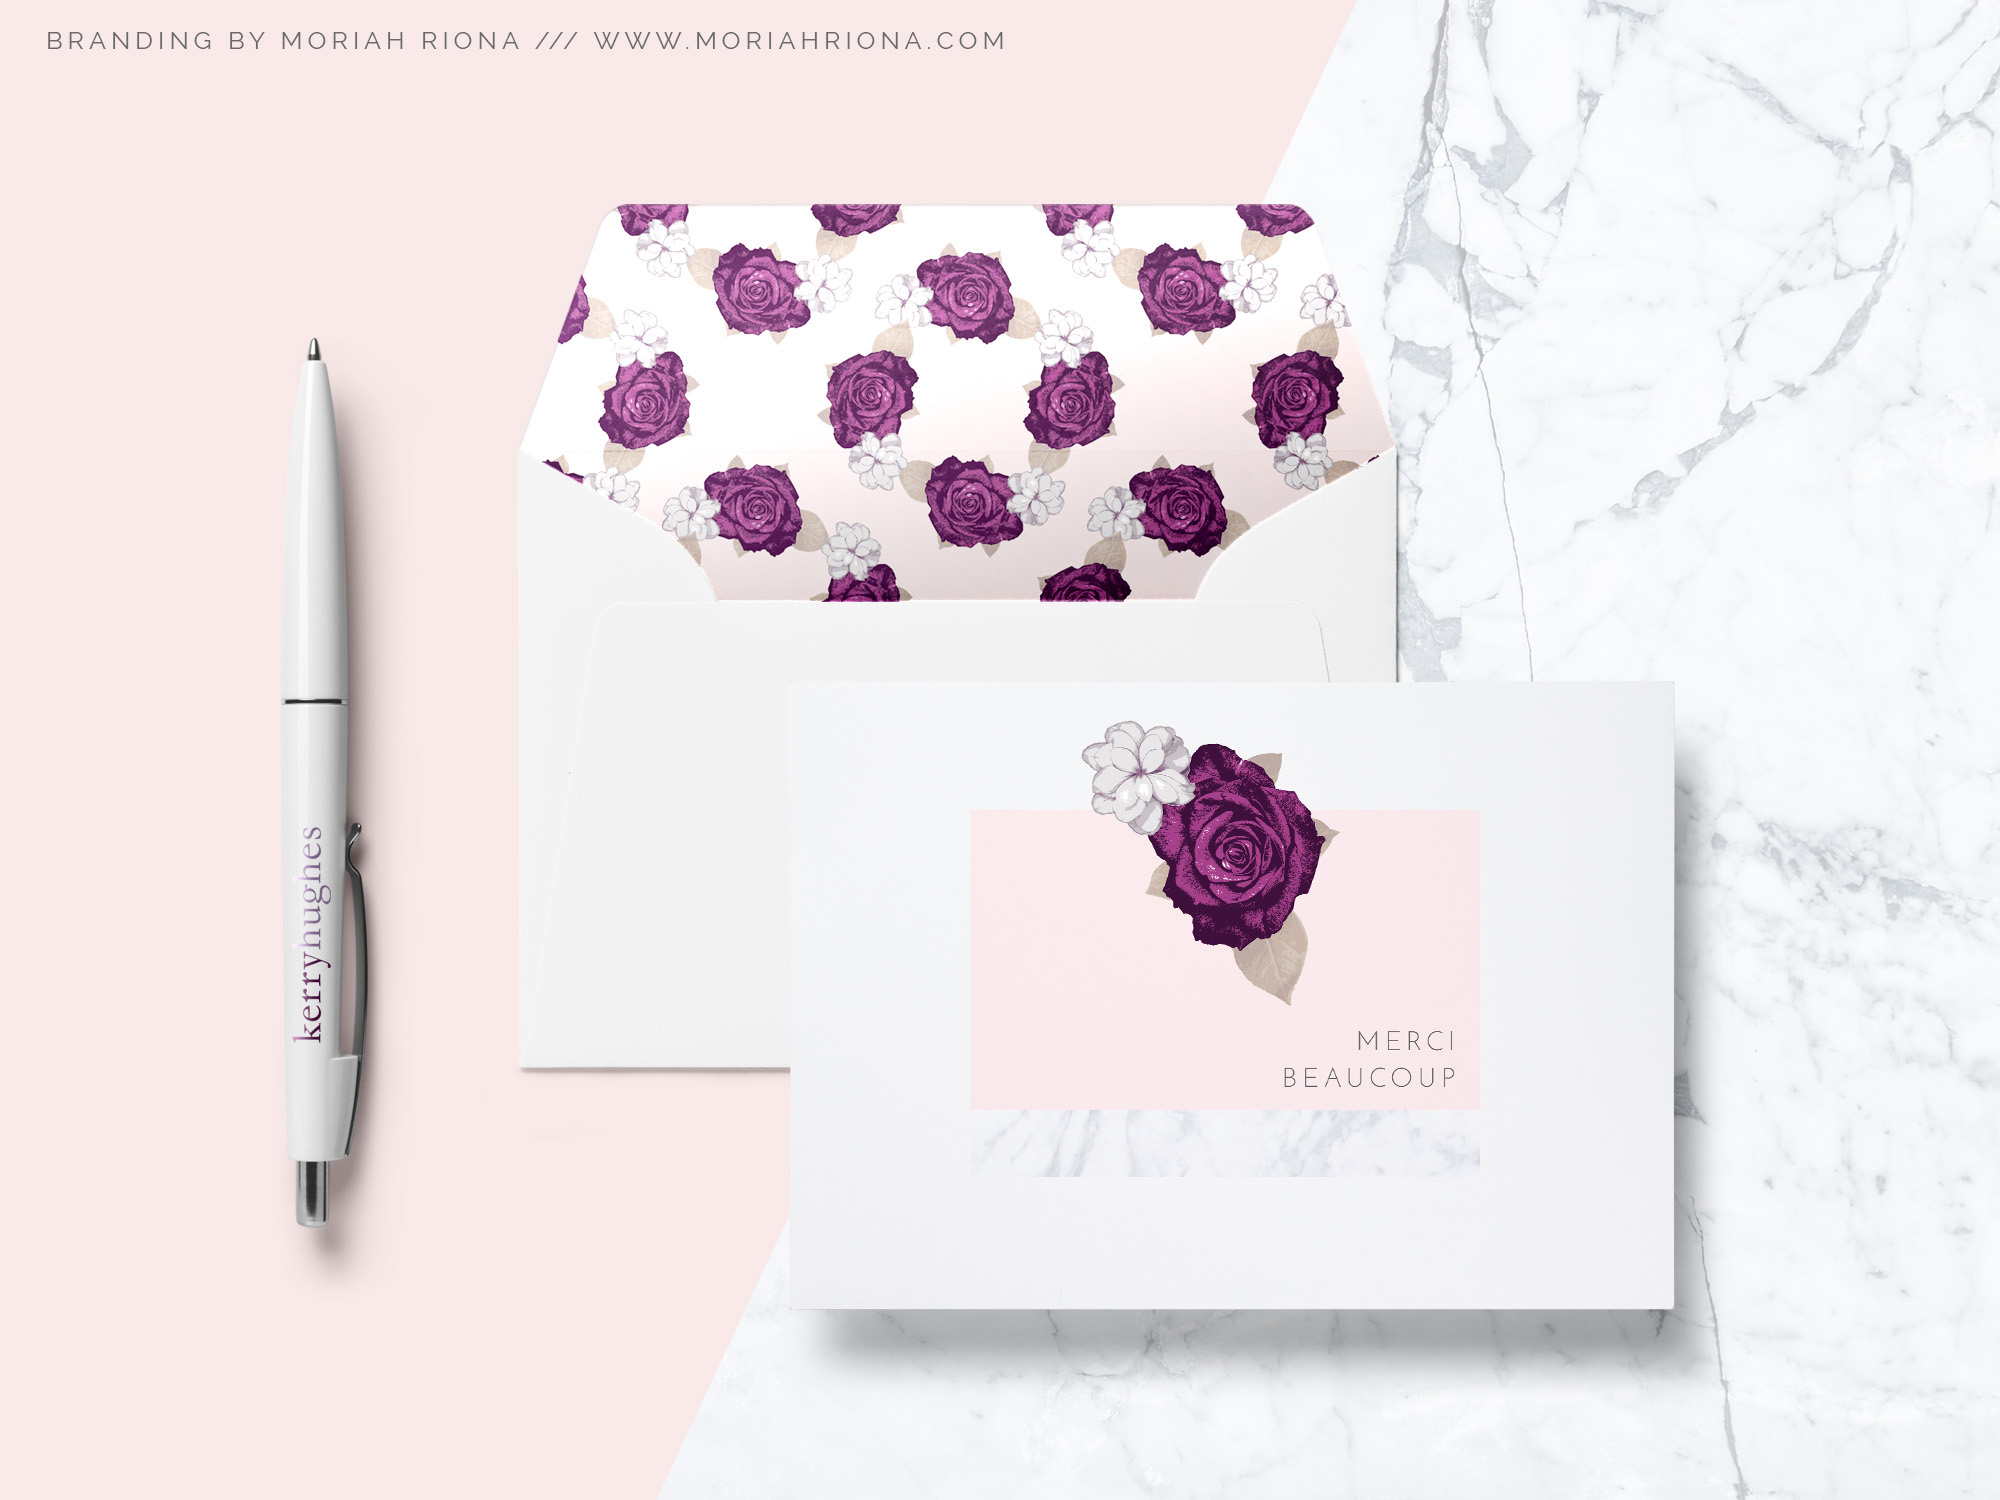 Branded stationery from Branding Collection design by Moriah Riona for fashion stylist, Kerry Hughes. Blush and purple branding.